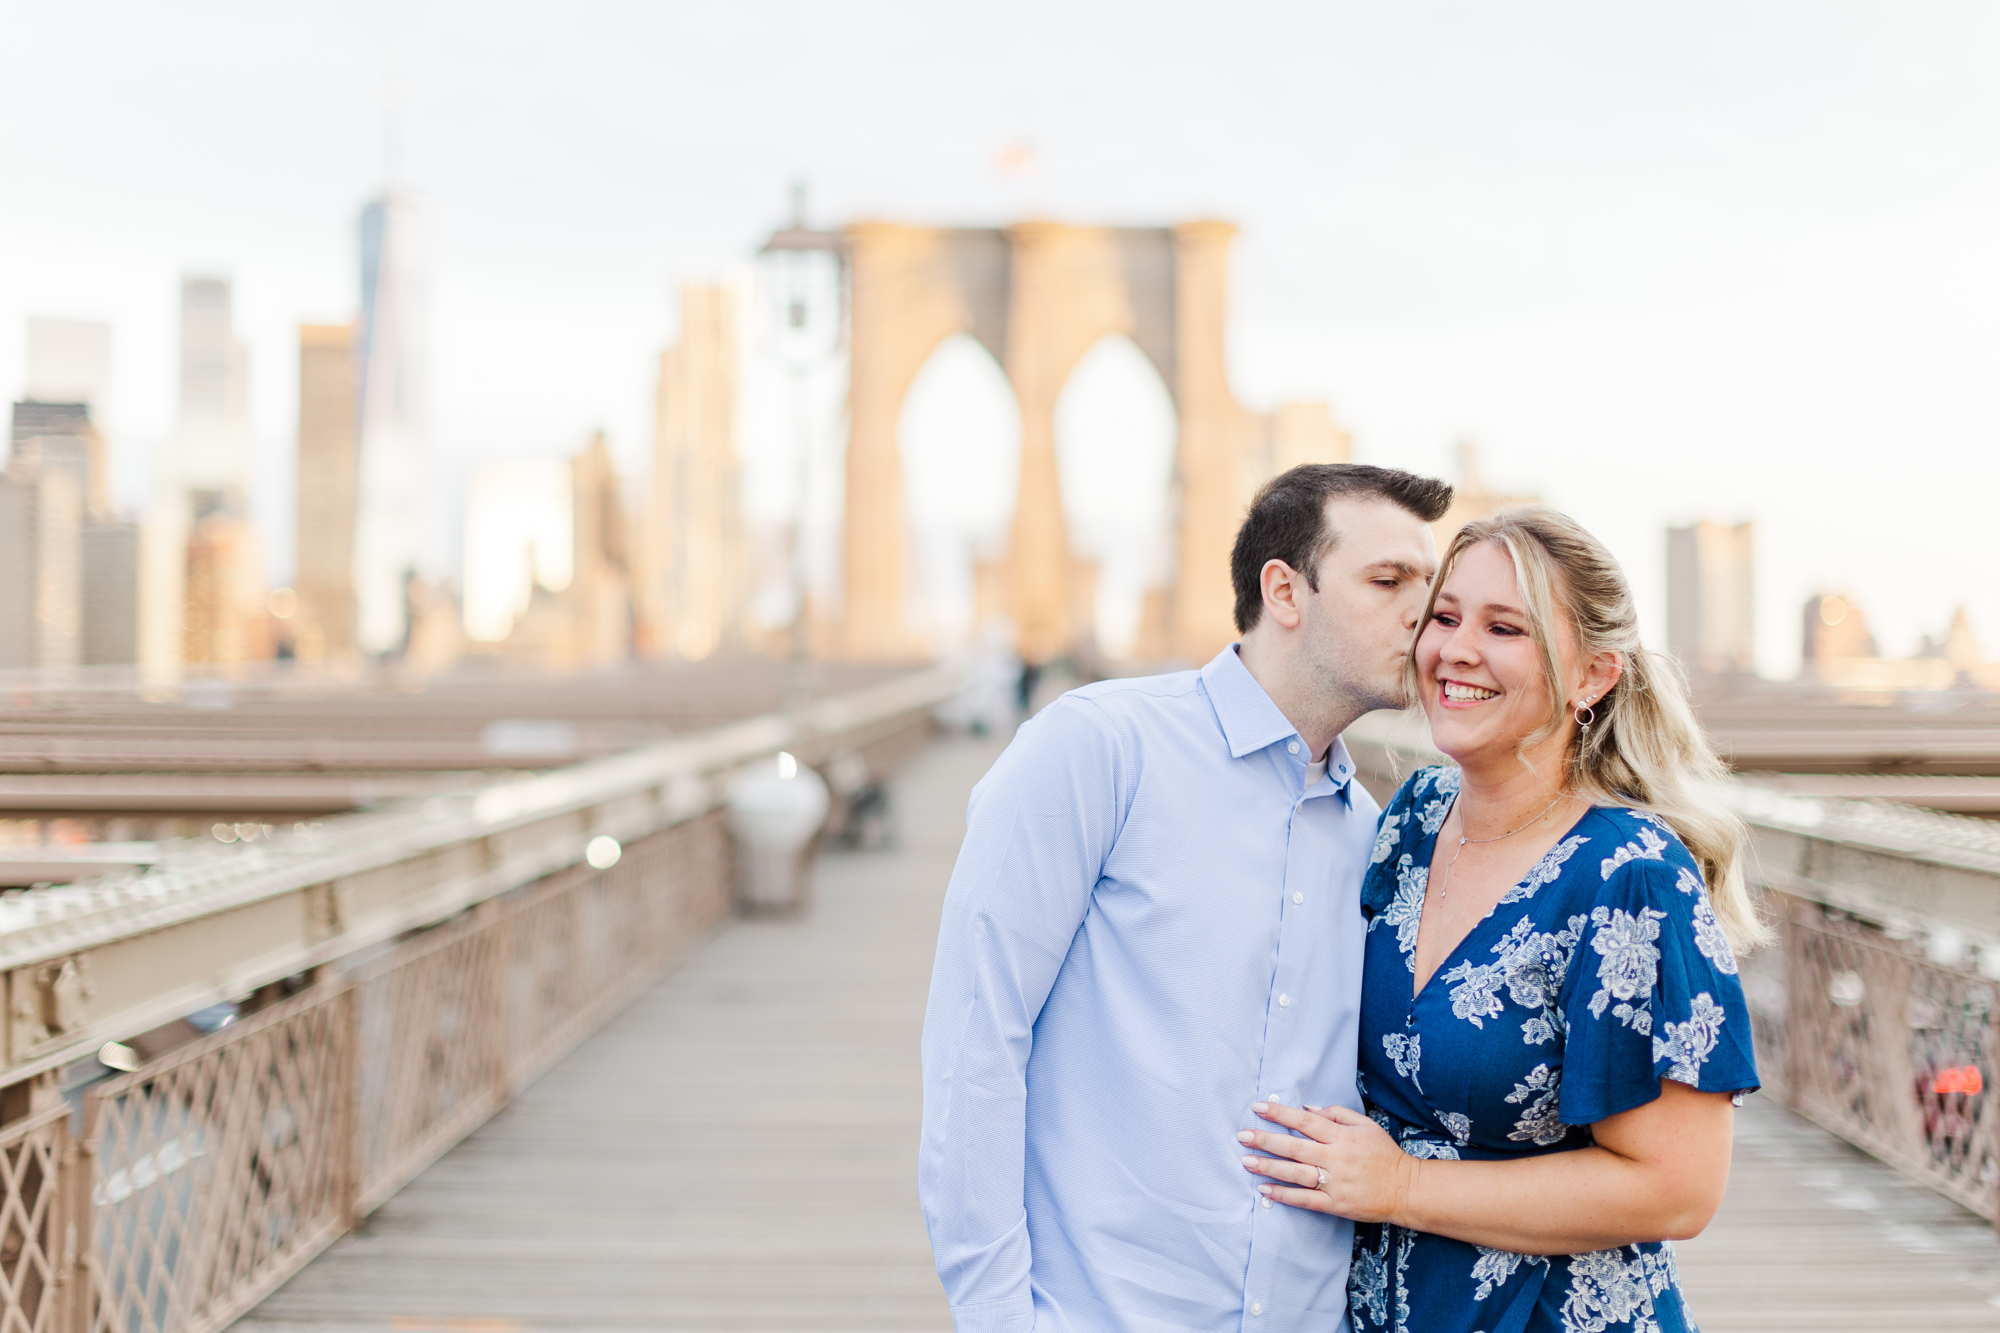 Personal Engagement Pictures in DUMBO